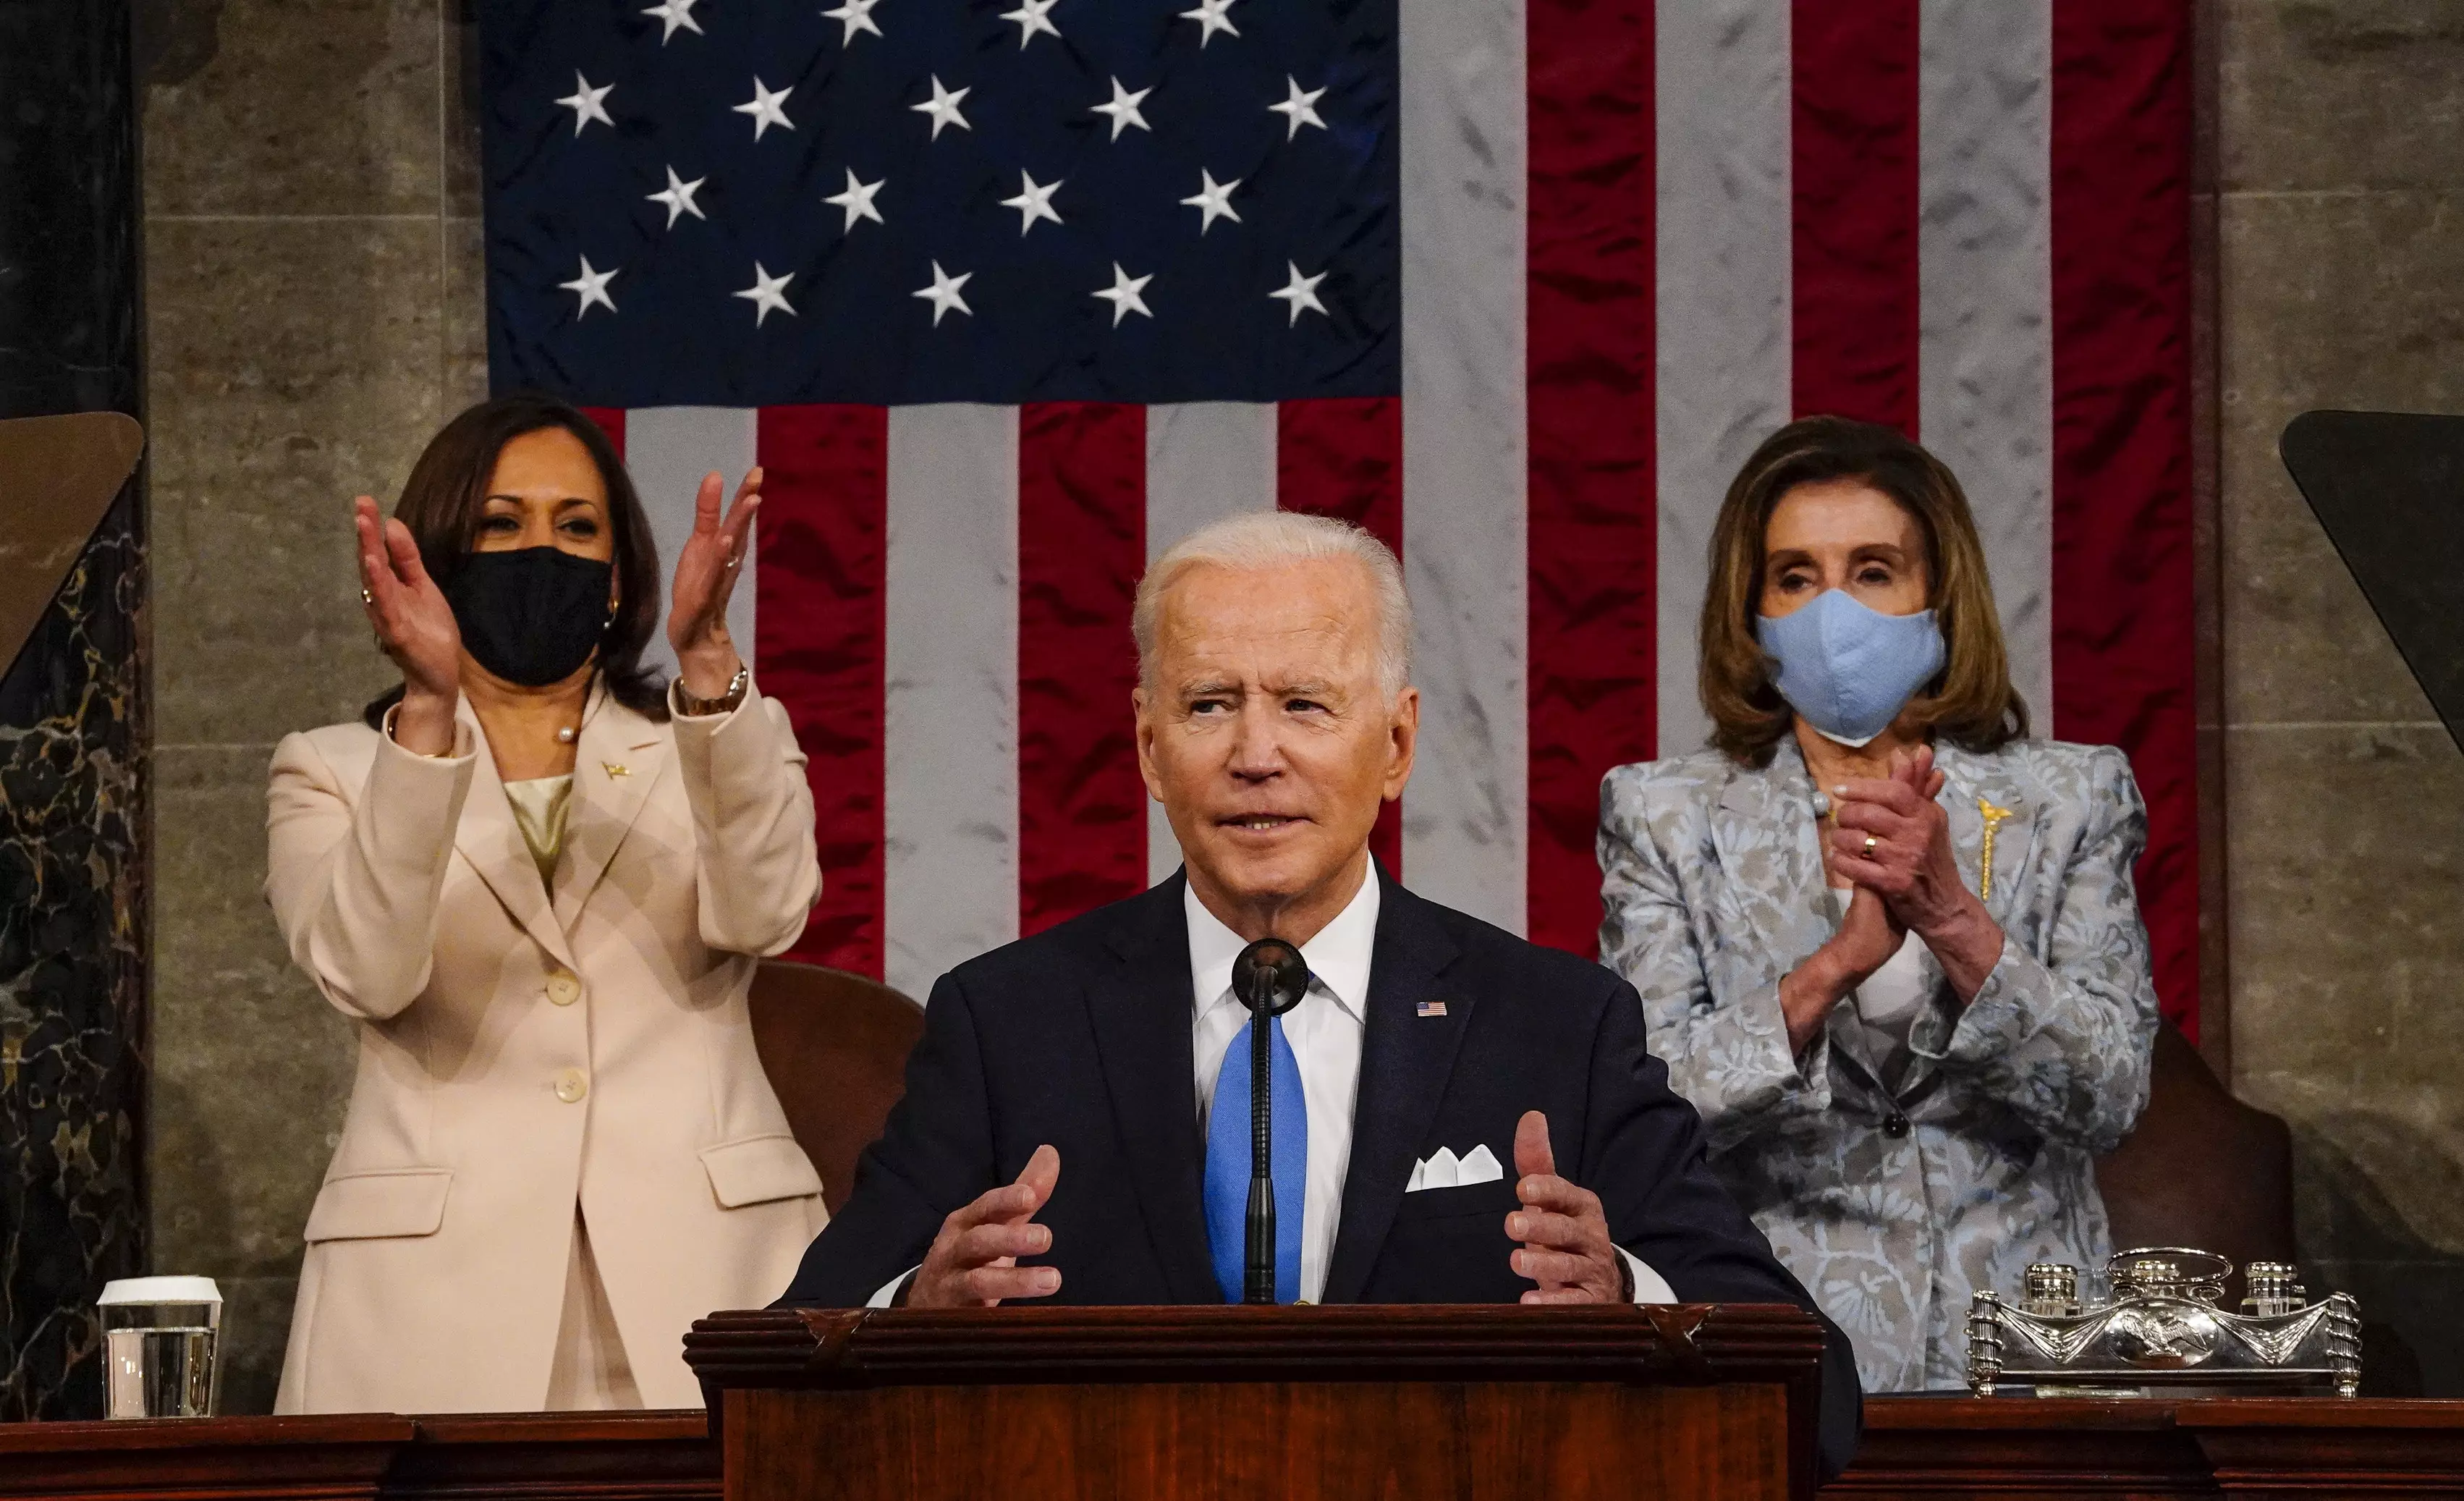 President Biden recently gave his first address to a joint session of Congress.